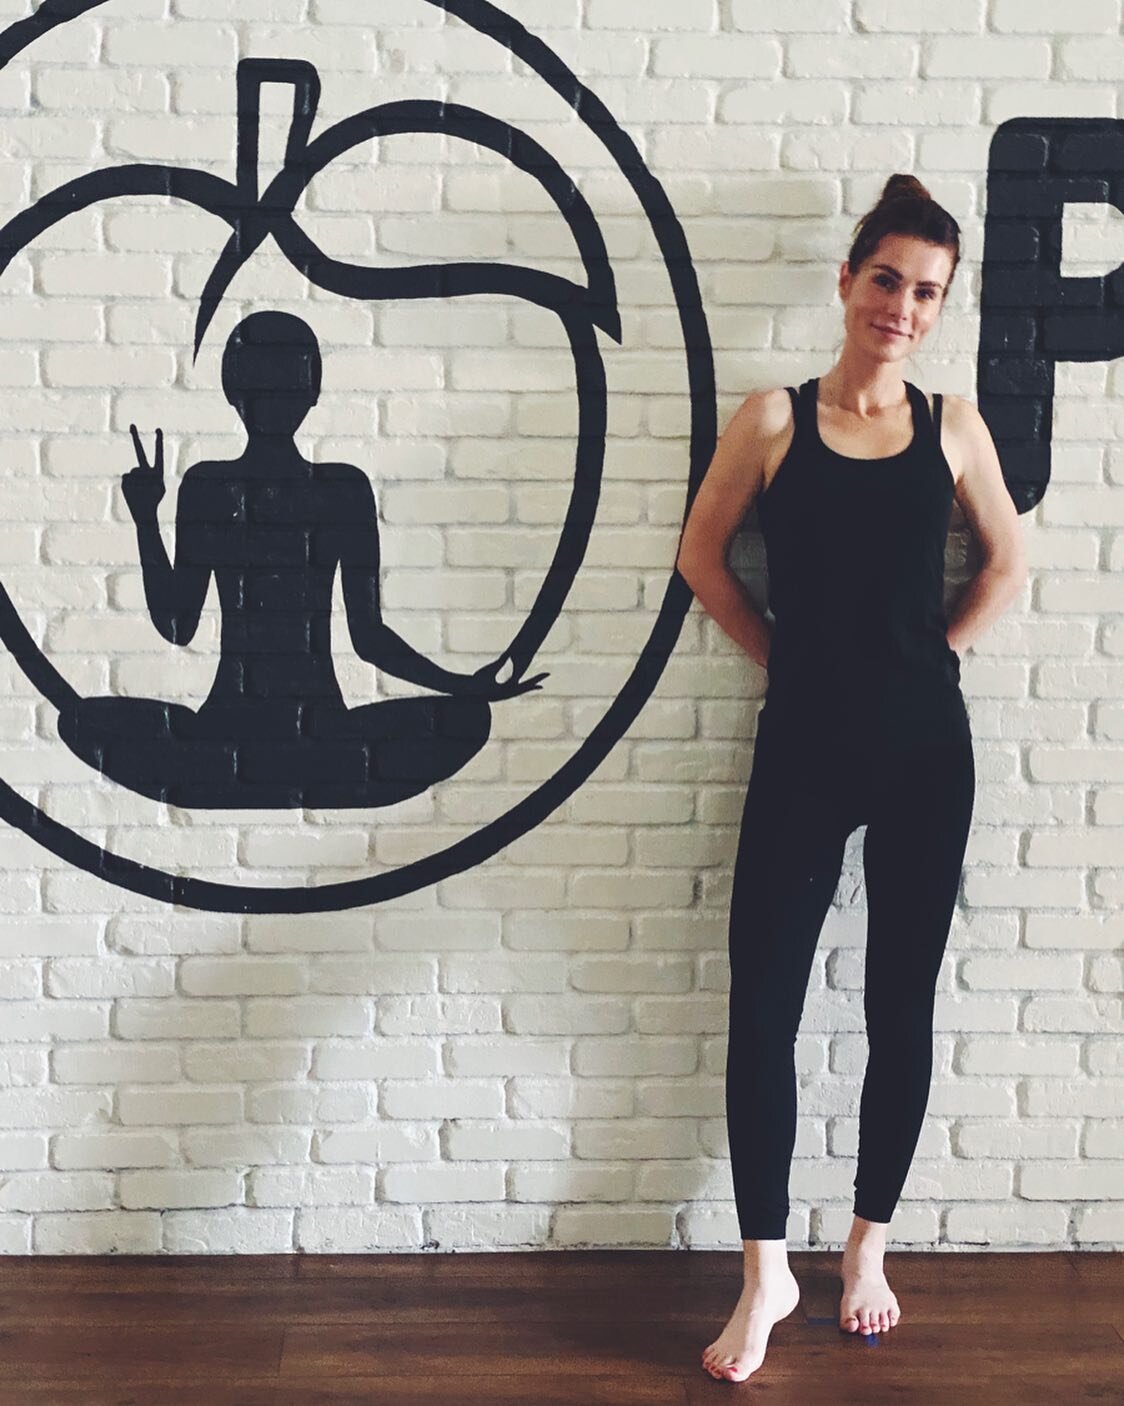 Dreary days be damned- I finally stepped foot in a yoga studio after a year and it was pure bliss. Expertly led by Prague native Alena Hrebickova Levine at aptly named @peachoutpoweryoga a group of beautiful and welcoming women stretched, toned (bewa